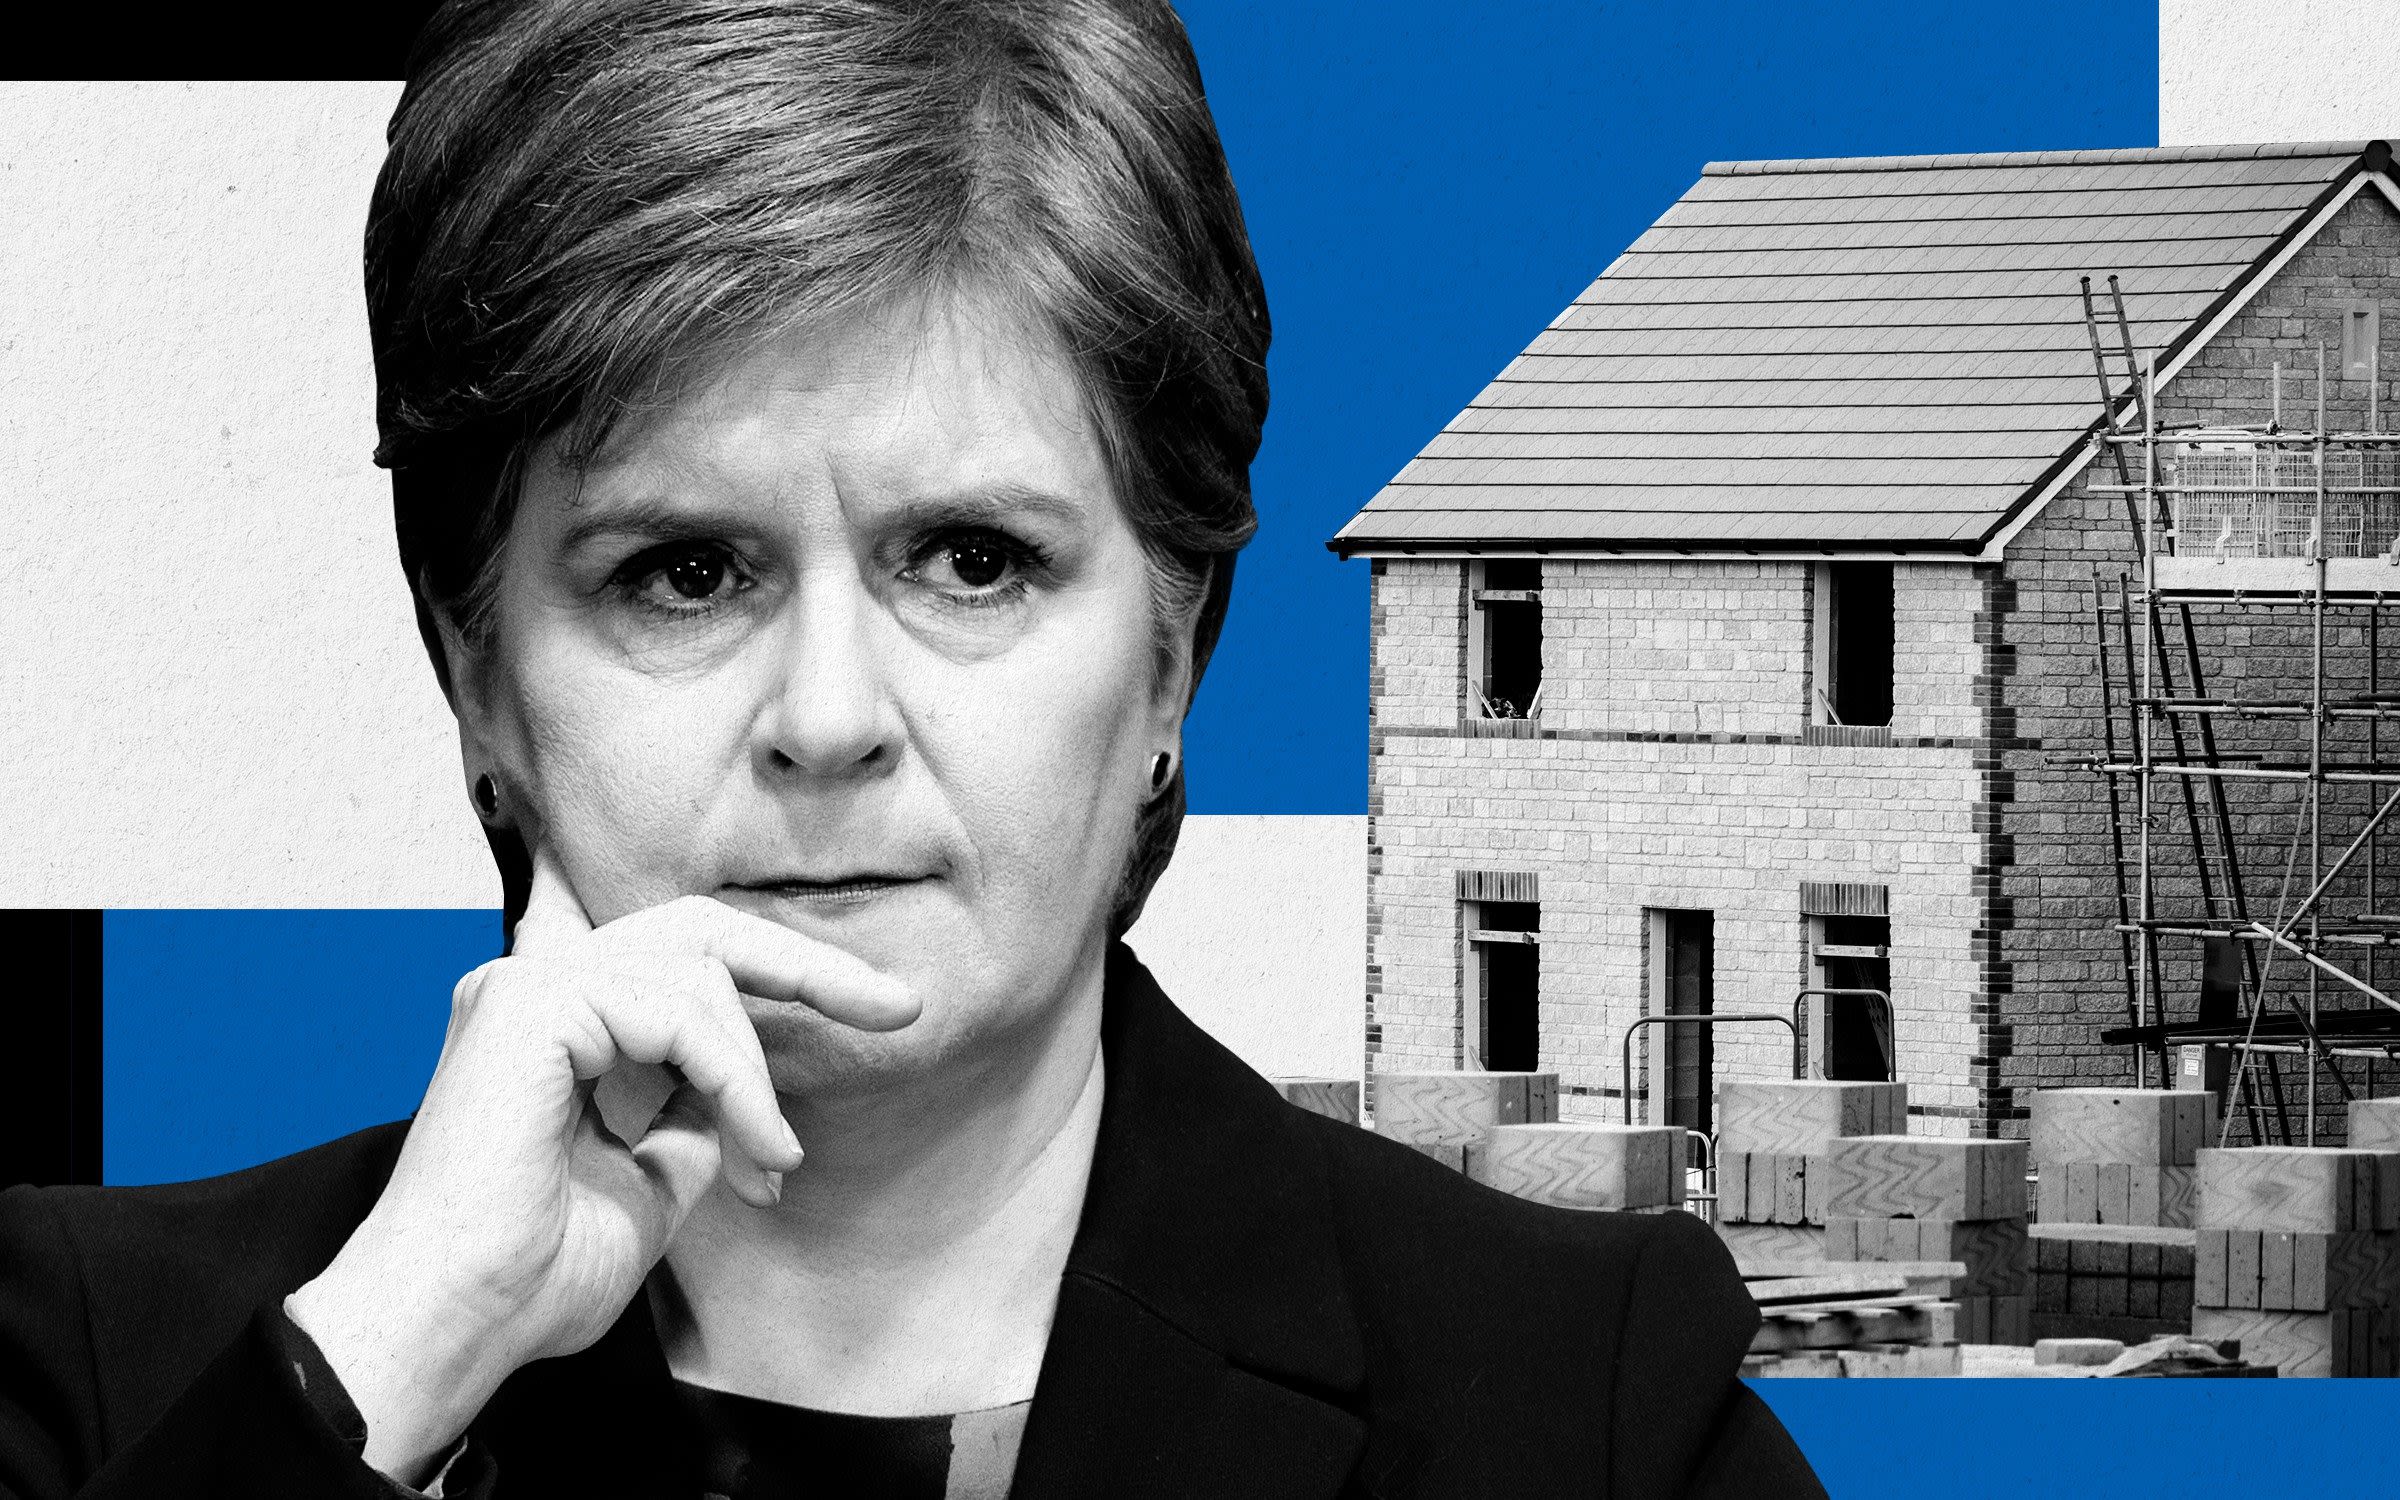 Why the SNP is blaming the Tories for Scotland’s ‘housing emergency’